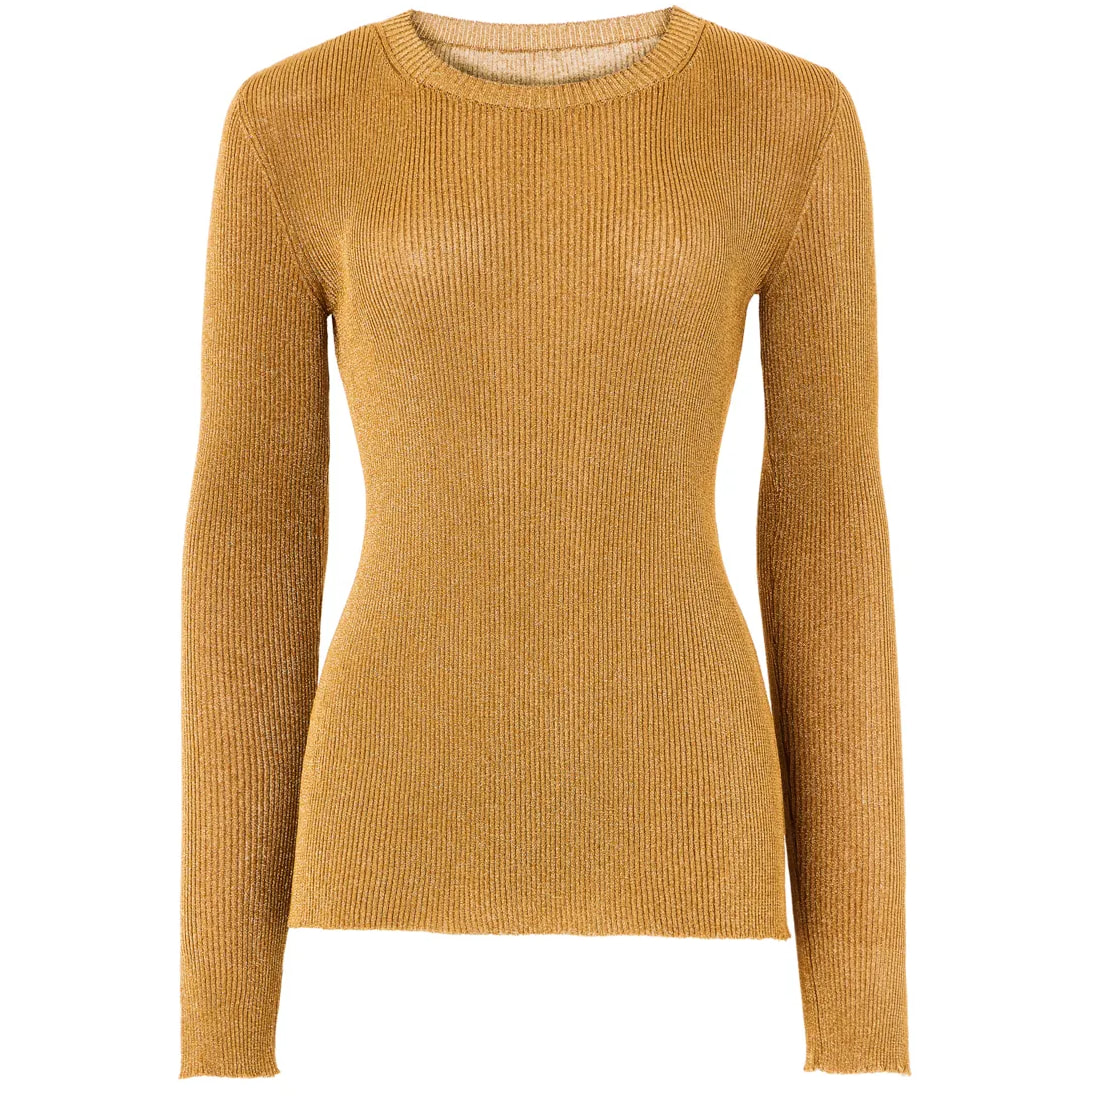 Temperley London Gold Cordial Sleeved Knit Top